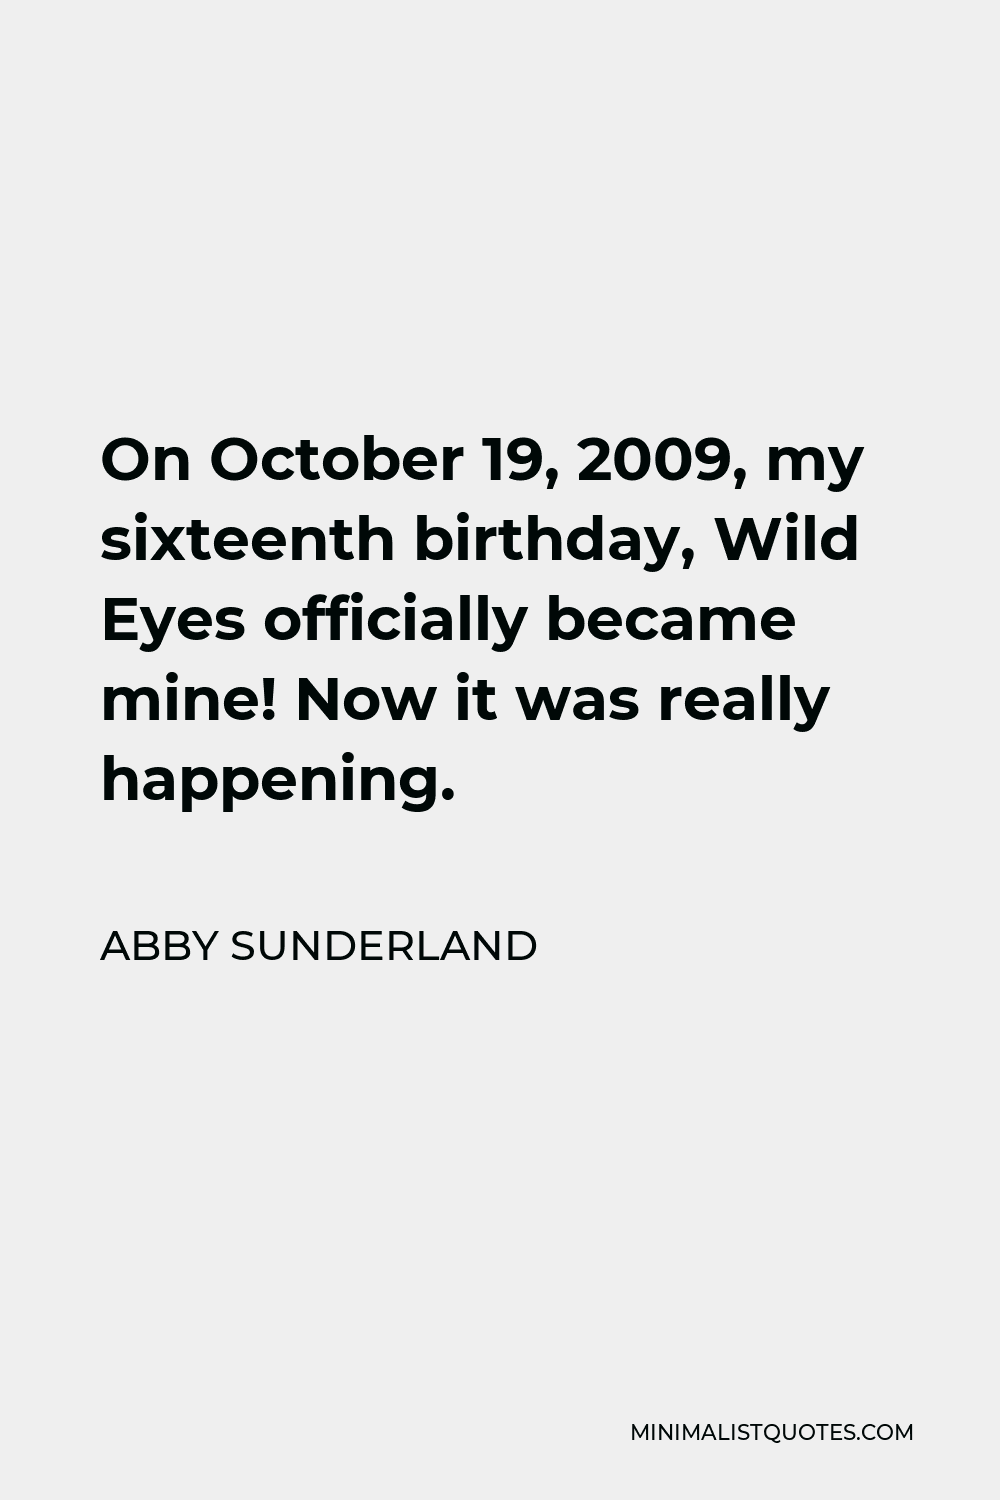 Abby Sunderland Quote - On October 19, 2009, my sixteenth birthday, Wild Eyes officially became mine! Now it was really happening.